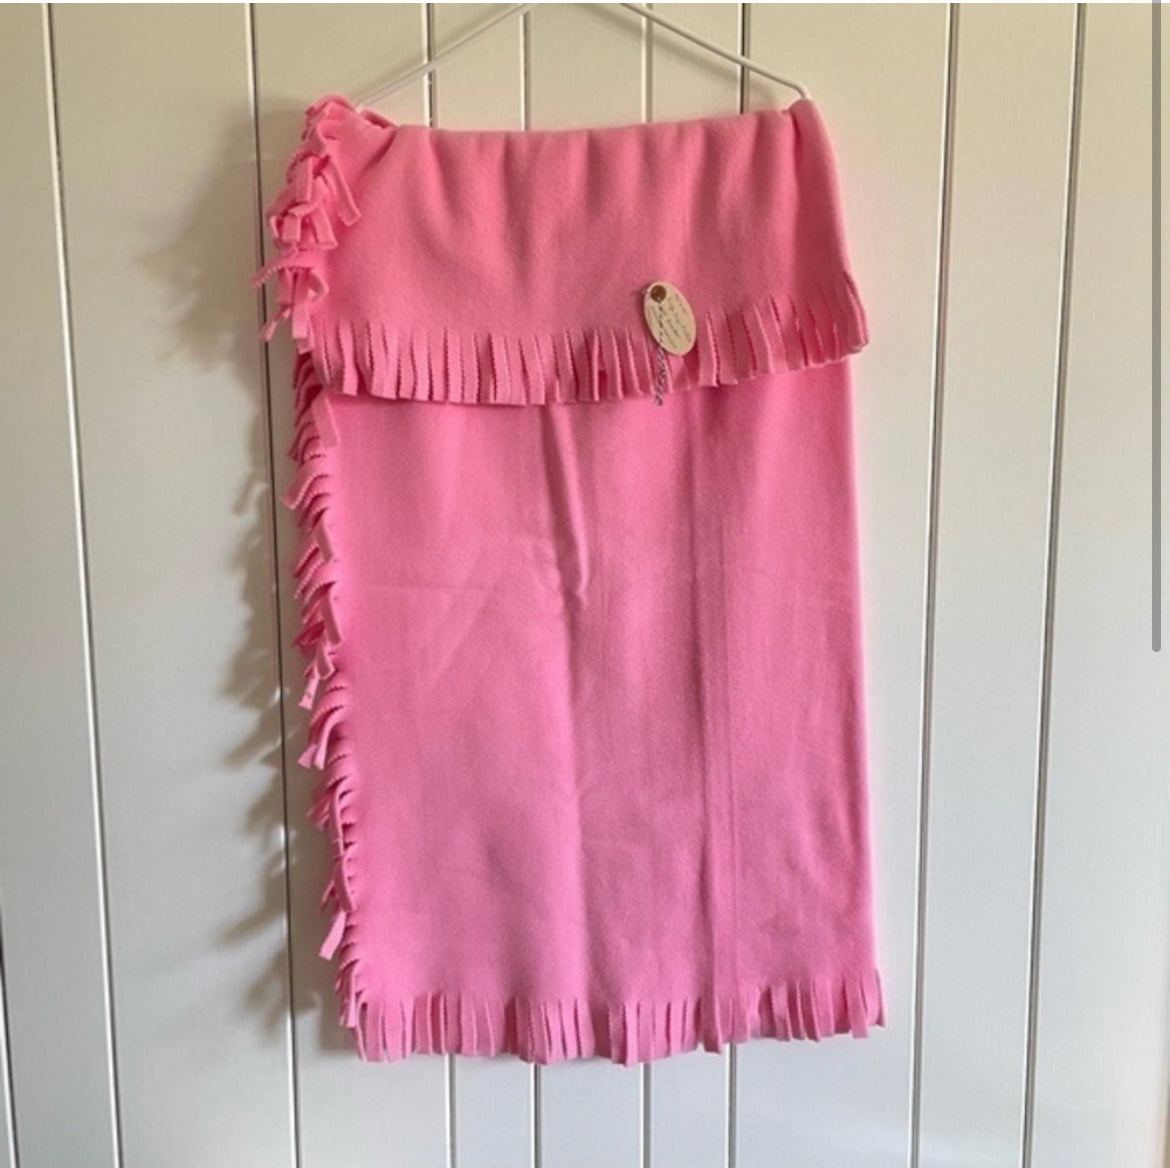 Hand Crafted Pink Fleece Baby Blanket NWT 42” x 40” Wide Fringe Kids Toddler Child Bedding Single Layer